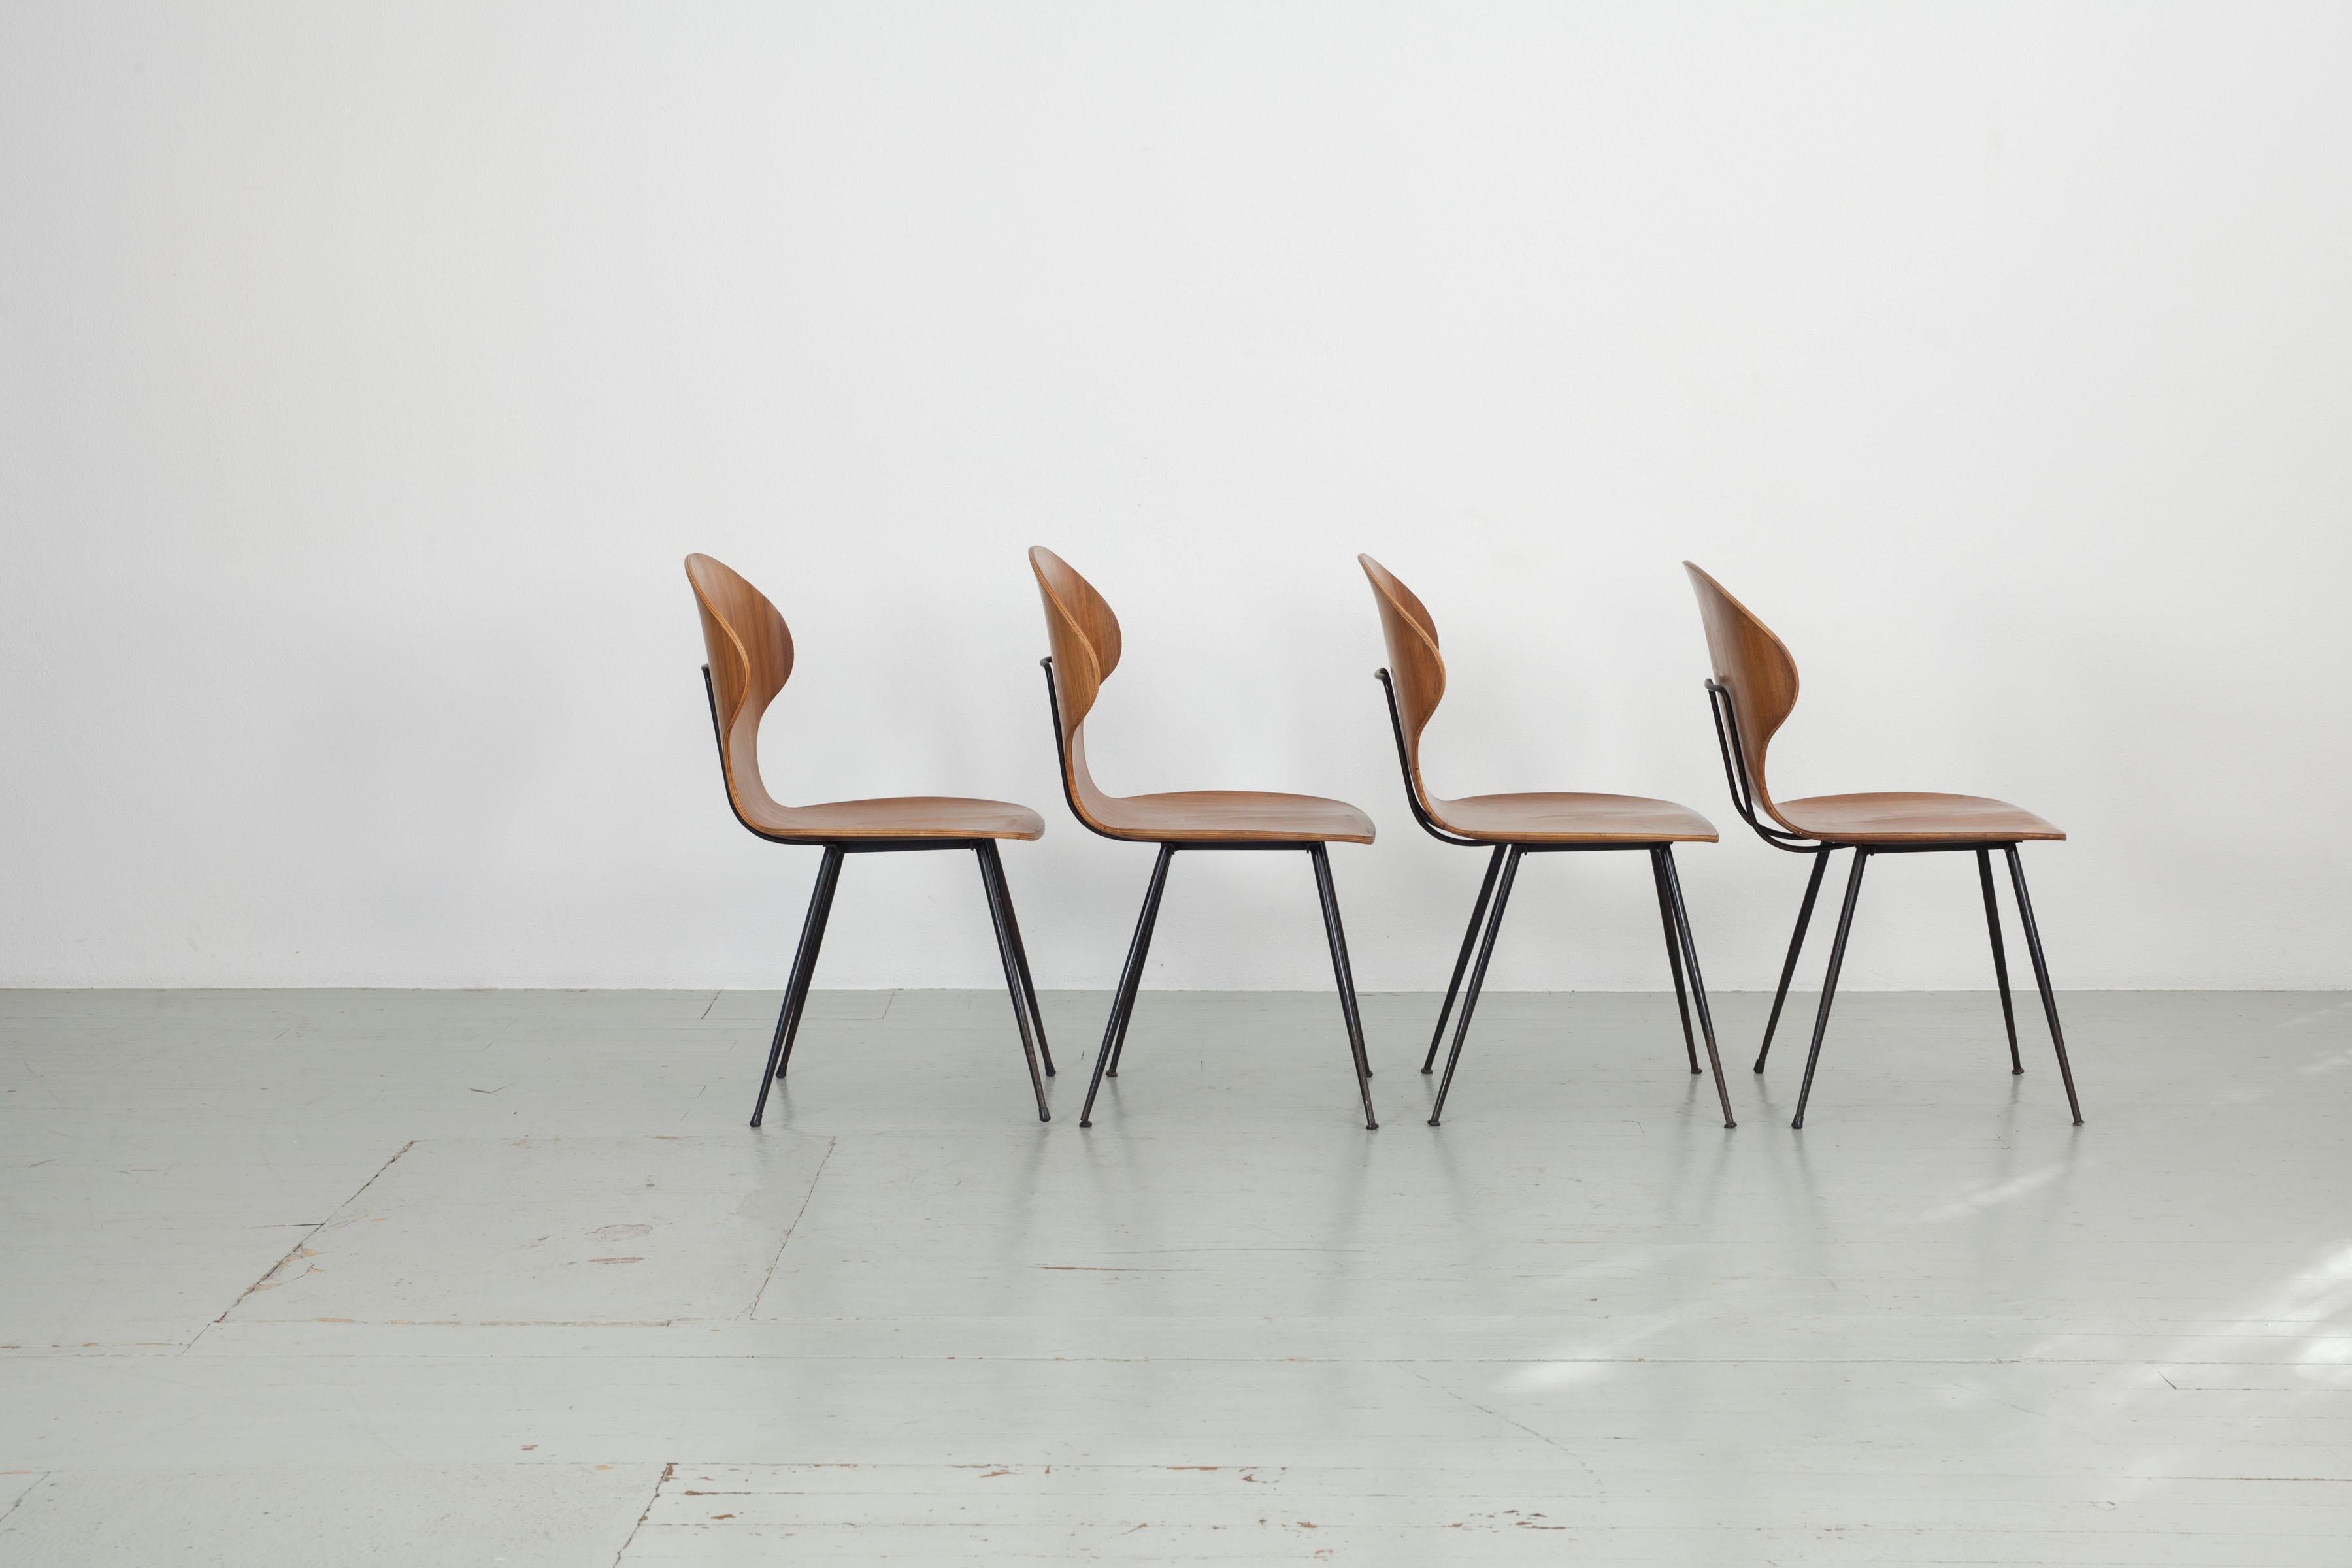 Mid-Century Modern Set of 4 Bentwood chairs by Carlo Ratti, Industria Legni Curvati, Italy  1950s. For Sale